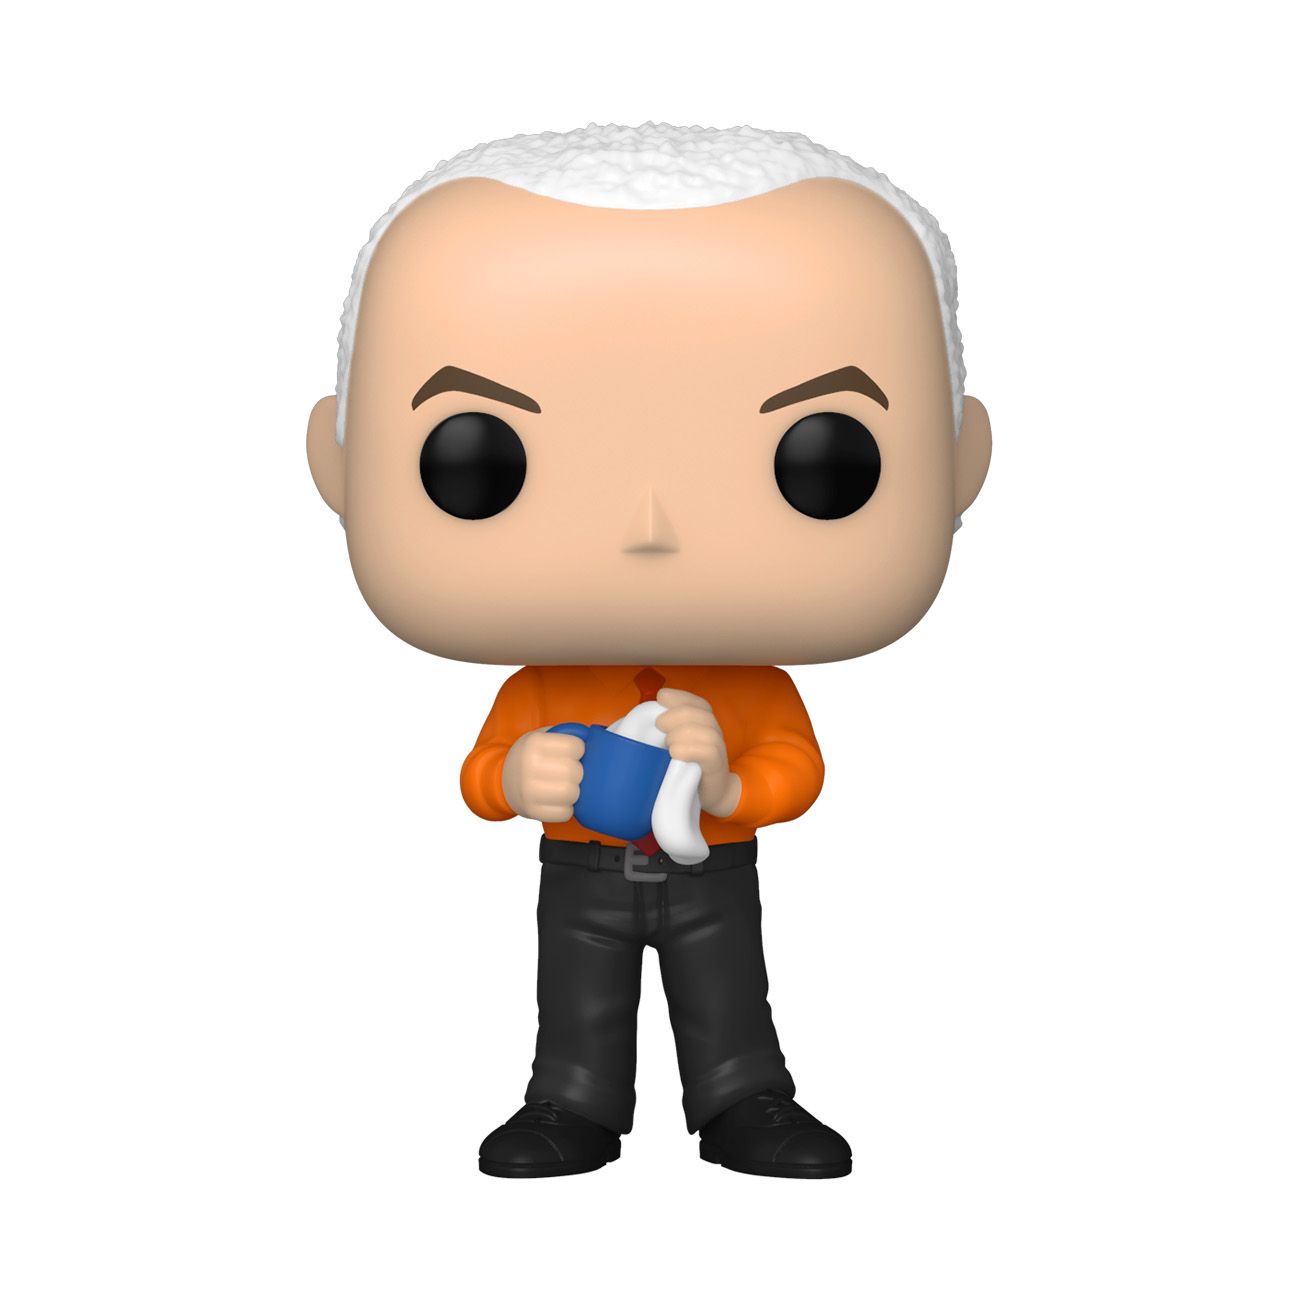 Friends Funko Pop Gunther holding a cup (out of box)